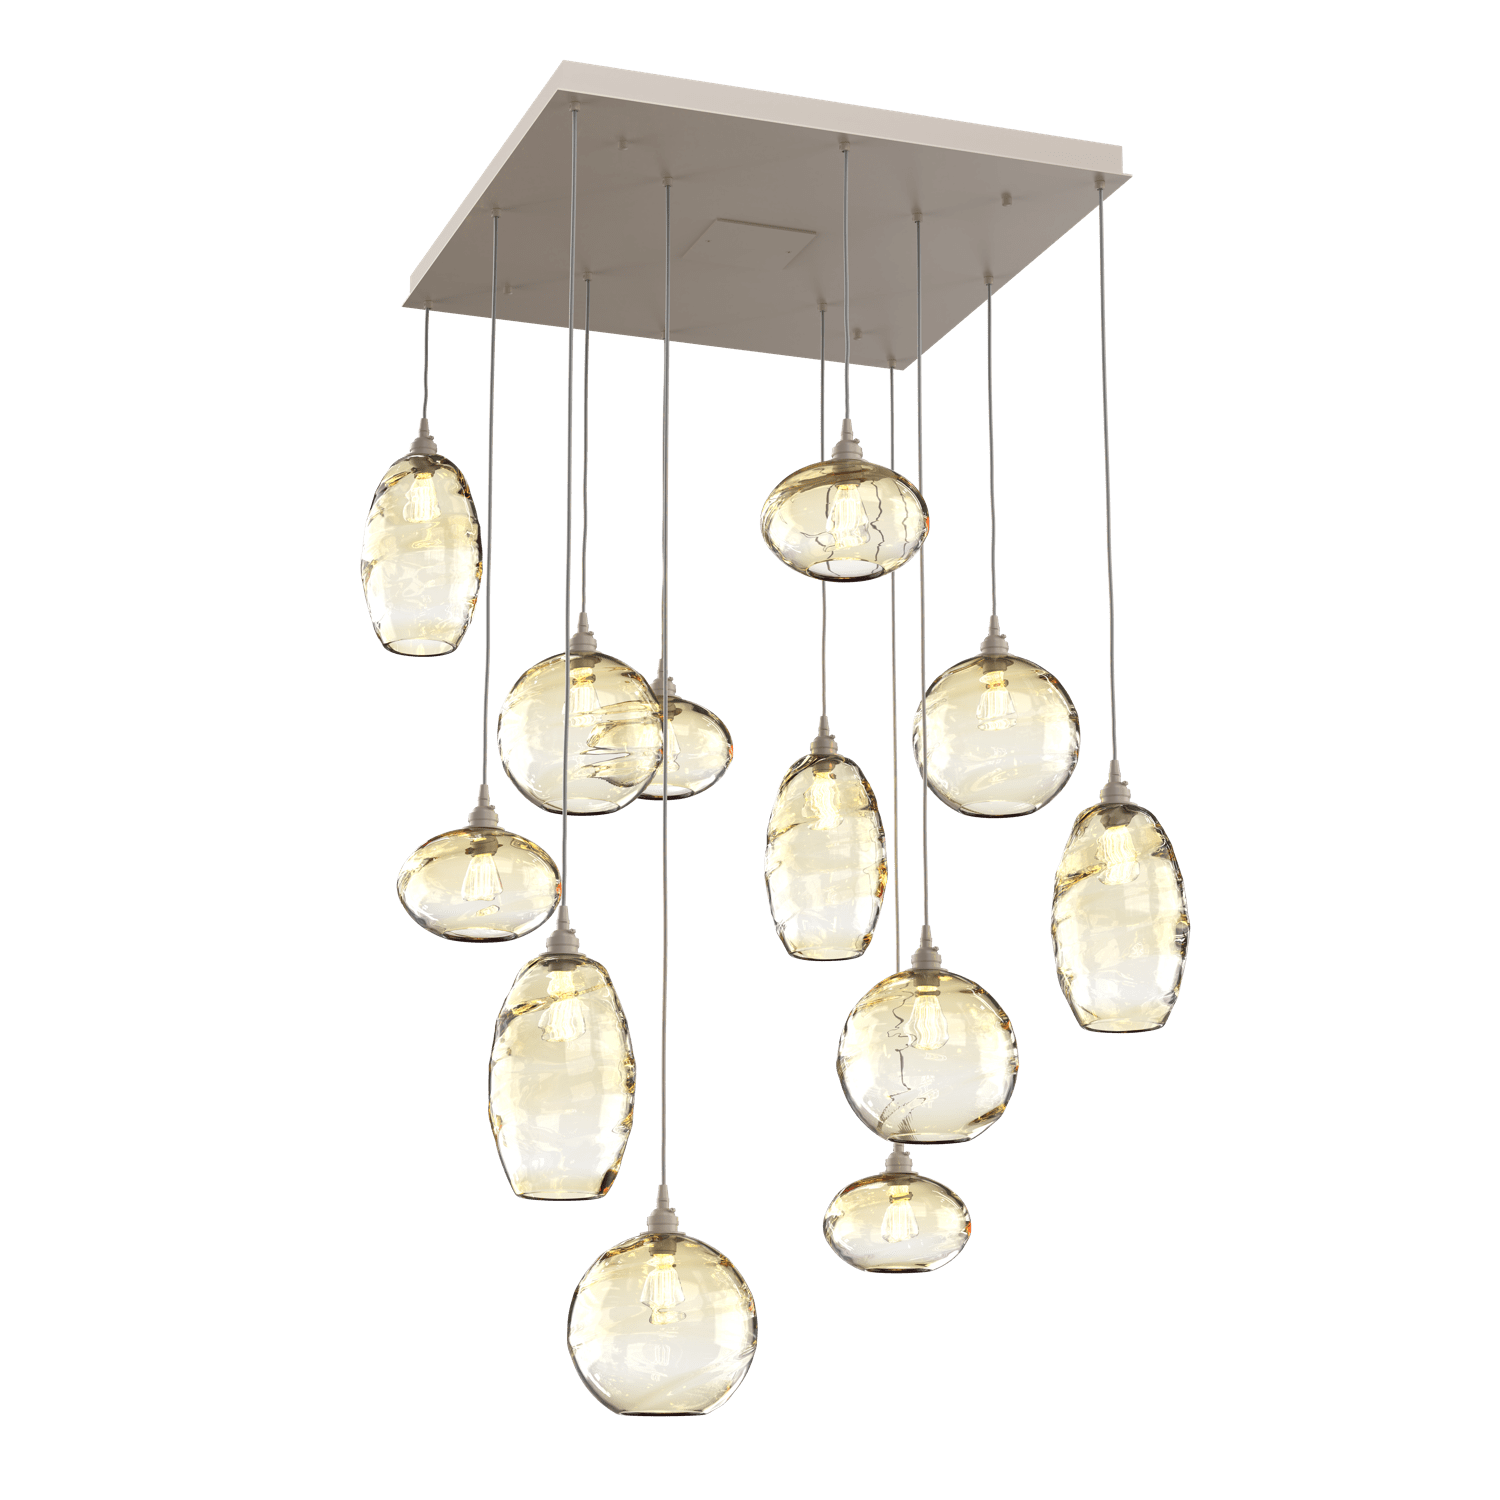 CHB0048-12-BS-OA-Hammerton-Studio-Optic-Blown-Glass-Misto-12-light-square-pendant-chandelier-with-metallic-beige-silver-finish-and-optic-amber-blown-glass-shades-and-incandescent-lamping